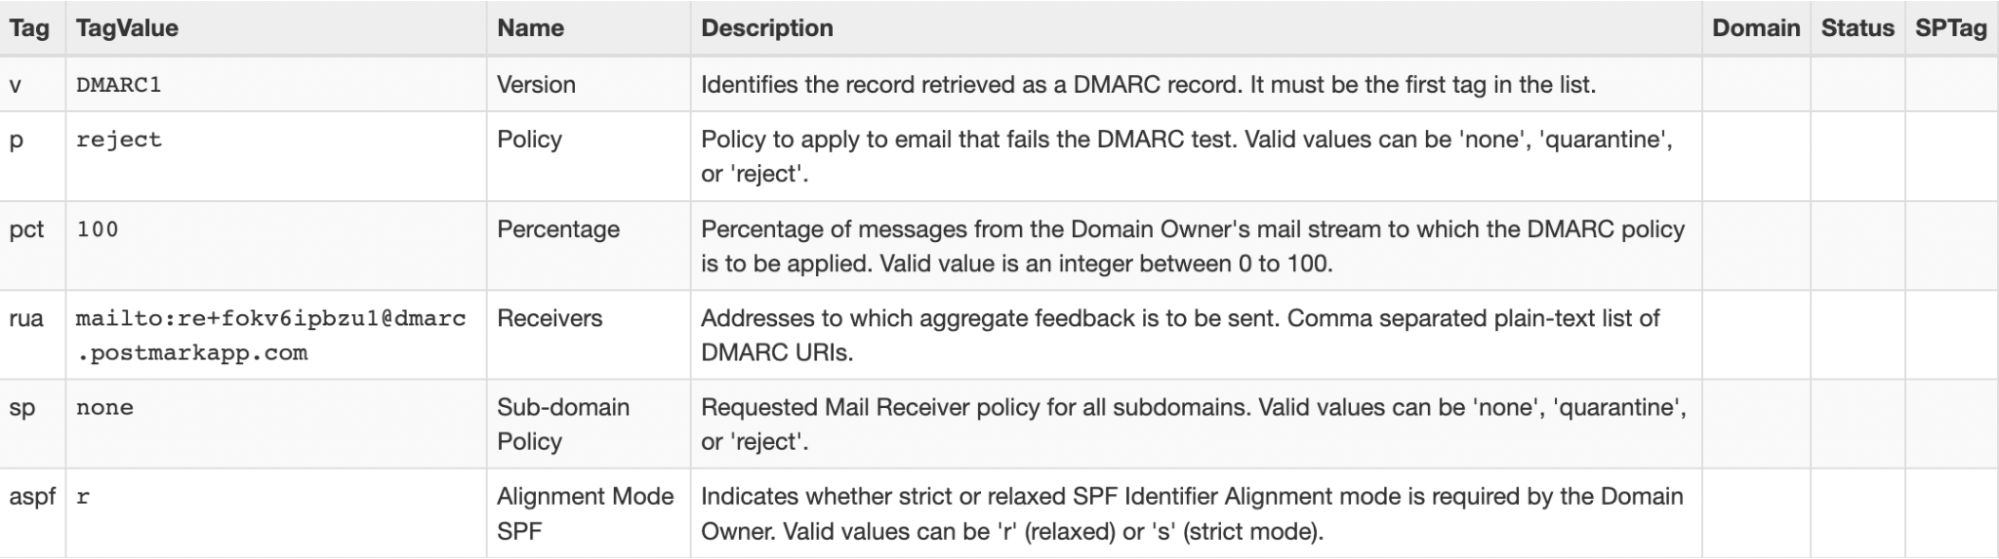 Explanation of DMARC policy values